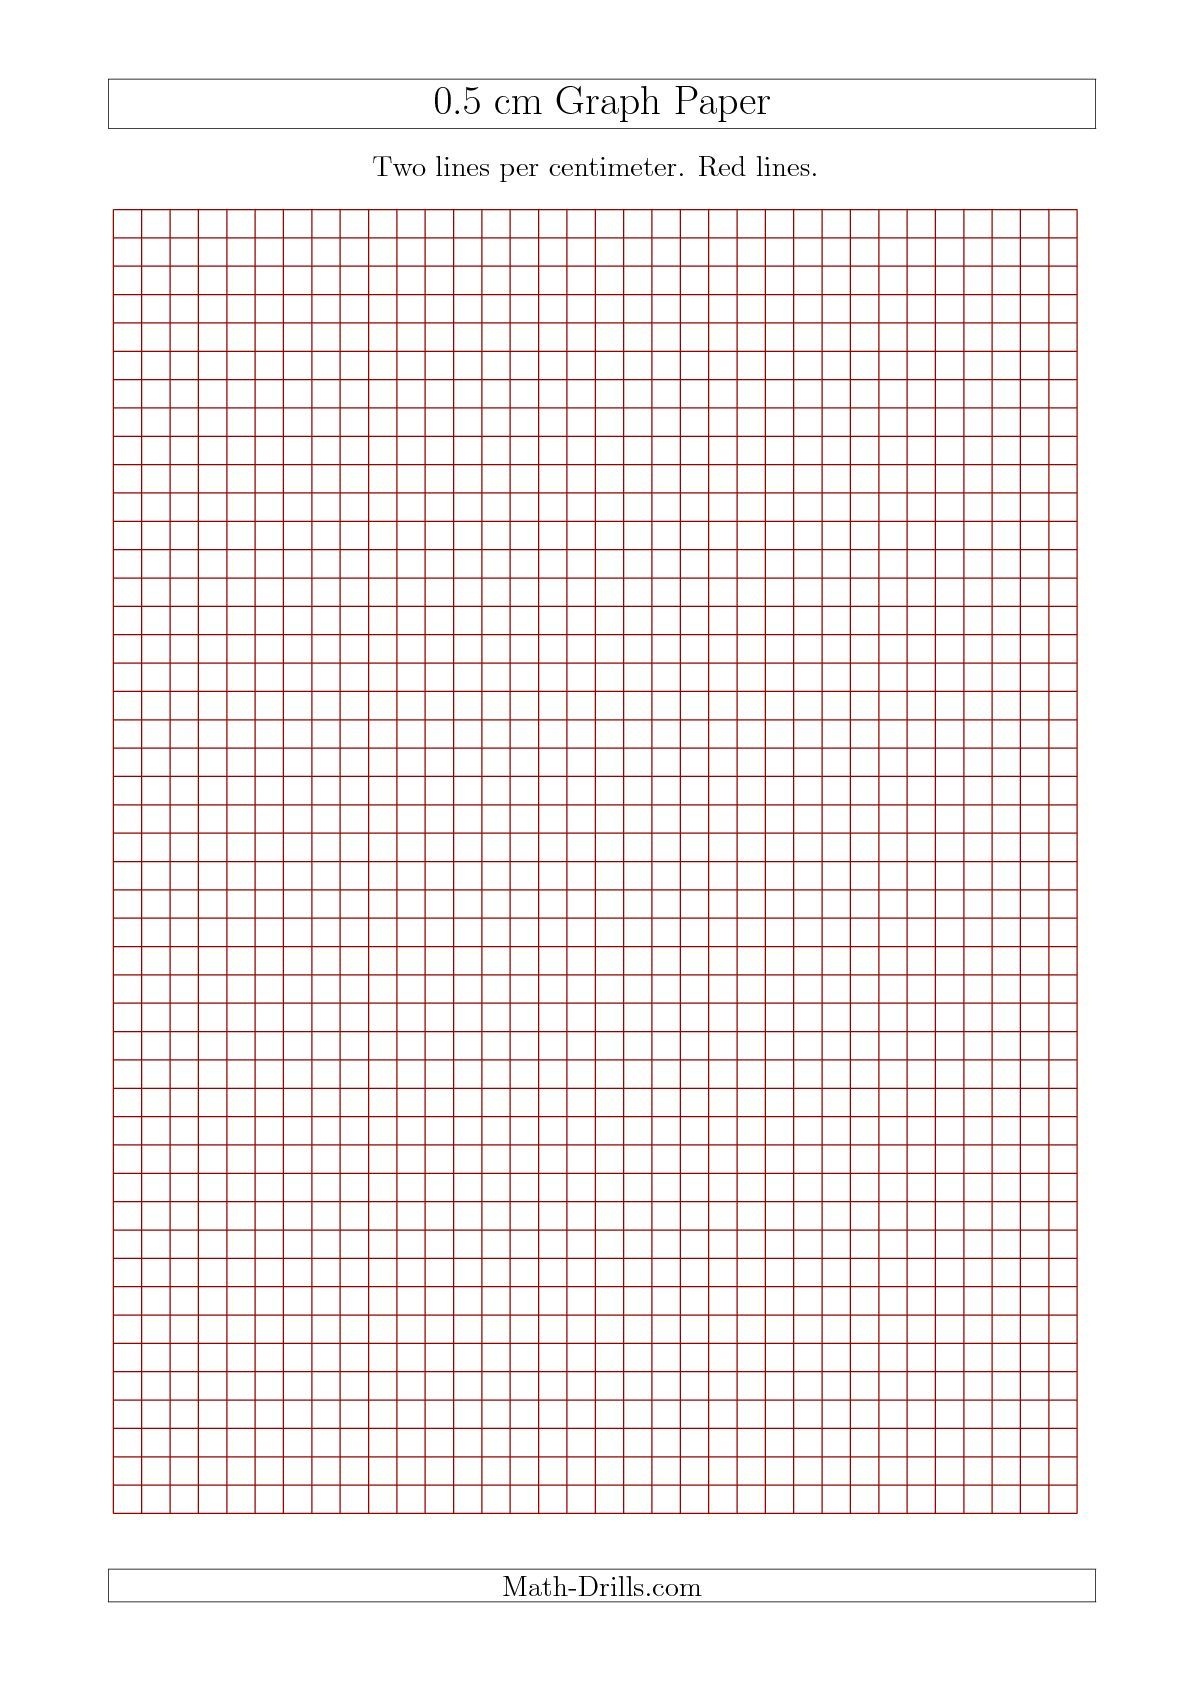 New 2015-09-17! 0.5 Cm Graph Paper With Red Lines (A4 Size) Math - Free Printable Graph Paper 1 4 Inch